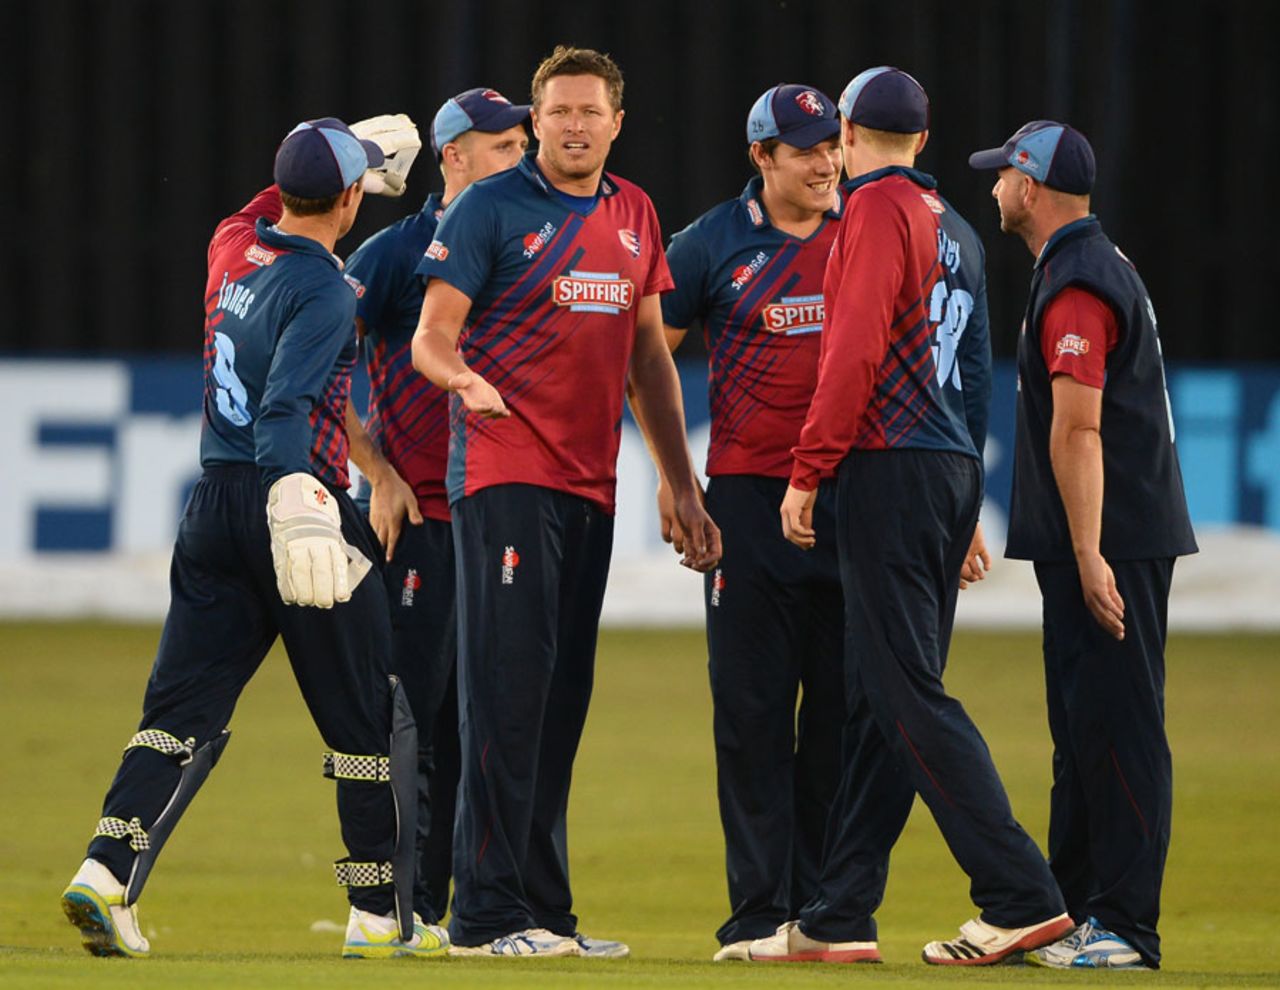 Mitch Claydon claimed 3 for 22, Sussex v Kent, FLt20 South Group, Hove, July 31, 2013